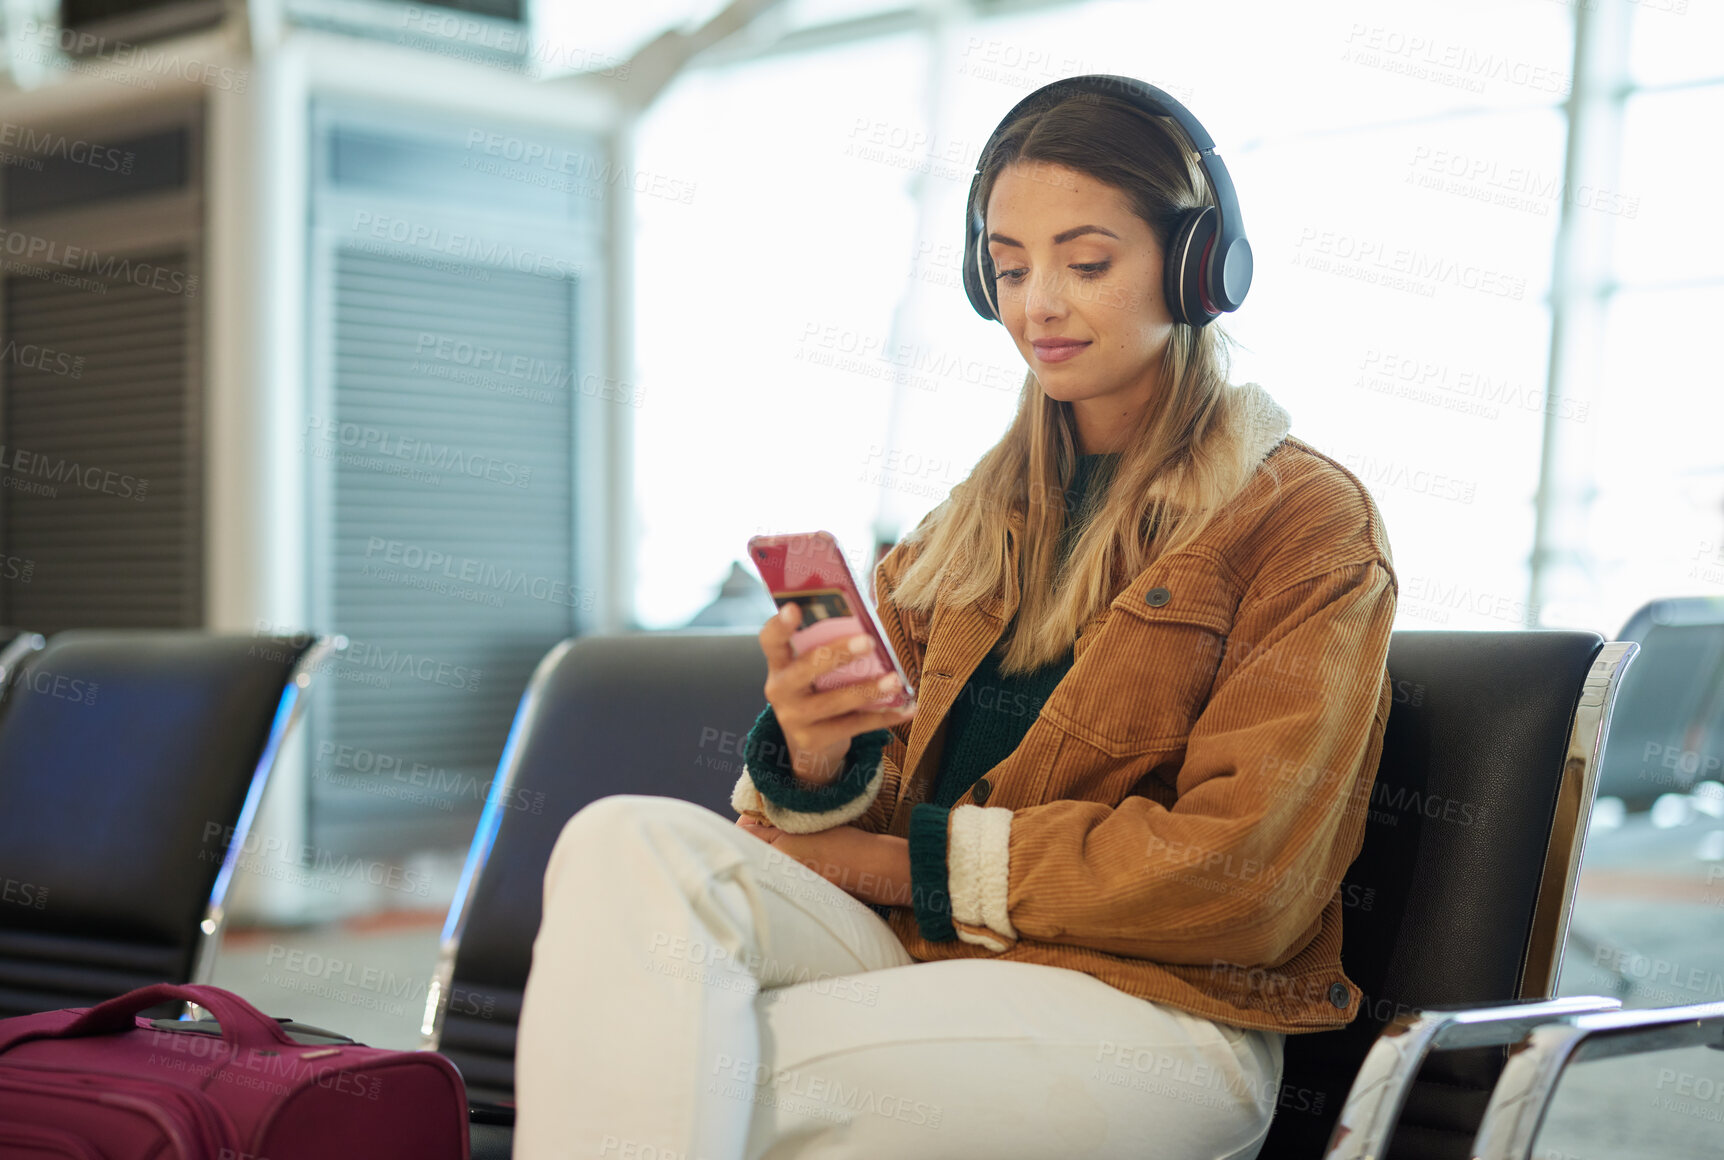 Buy stock photo Music headphones, phone and woman at airport lobby on social media, internet browsing or web scrolling. Travel, mobile technology and female with smartphone app for streaming radio, podcast or song.